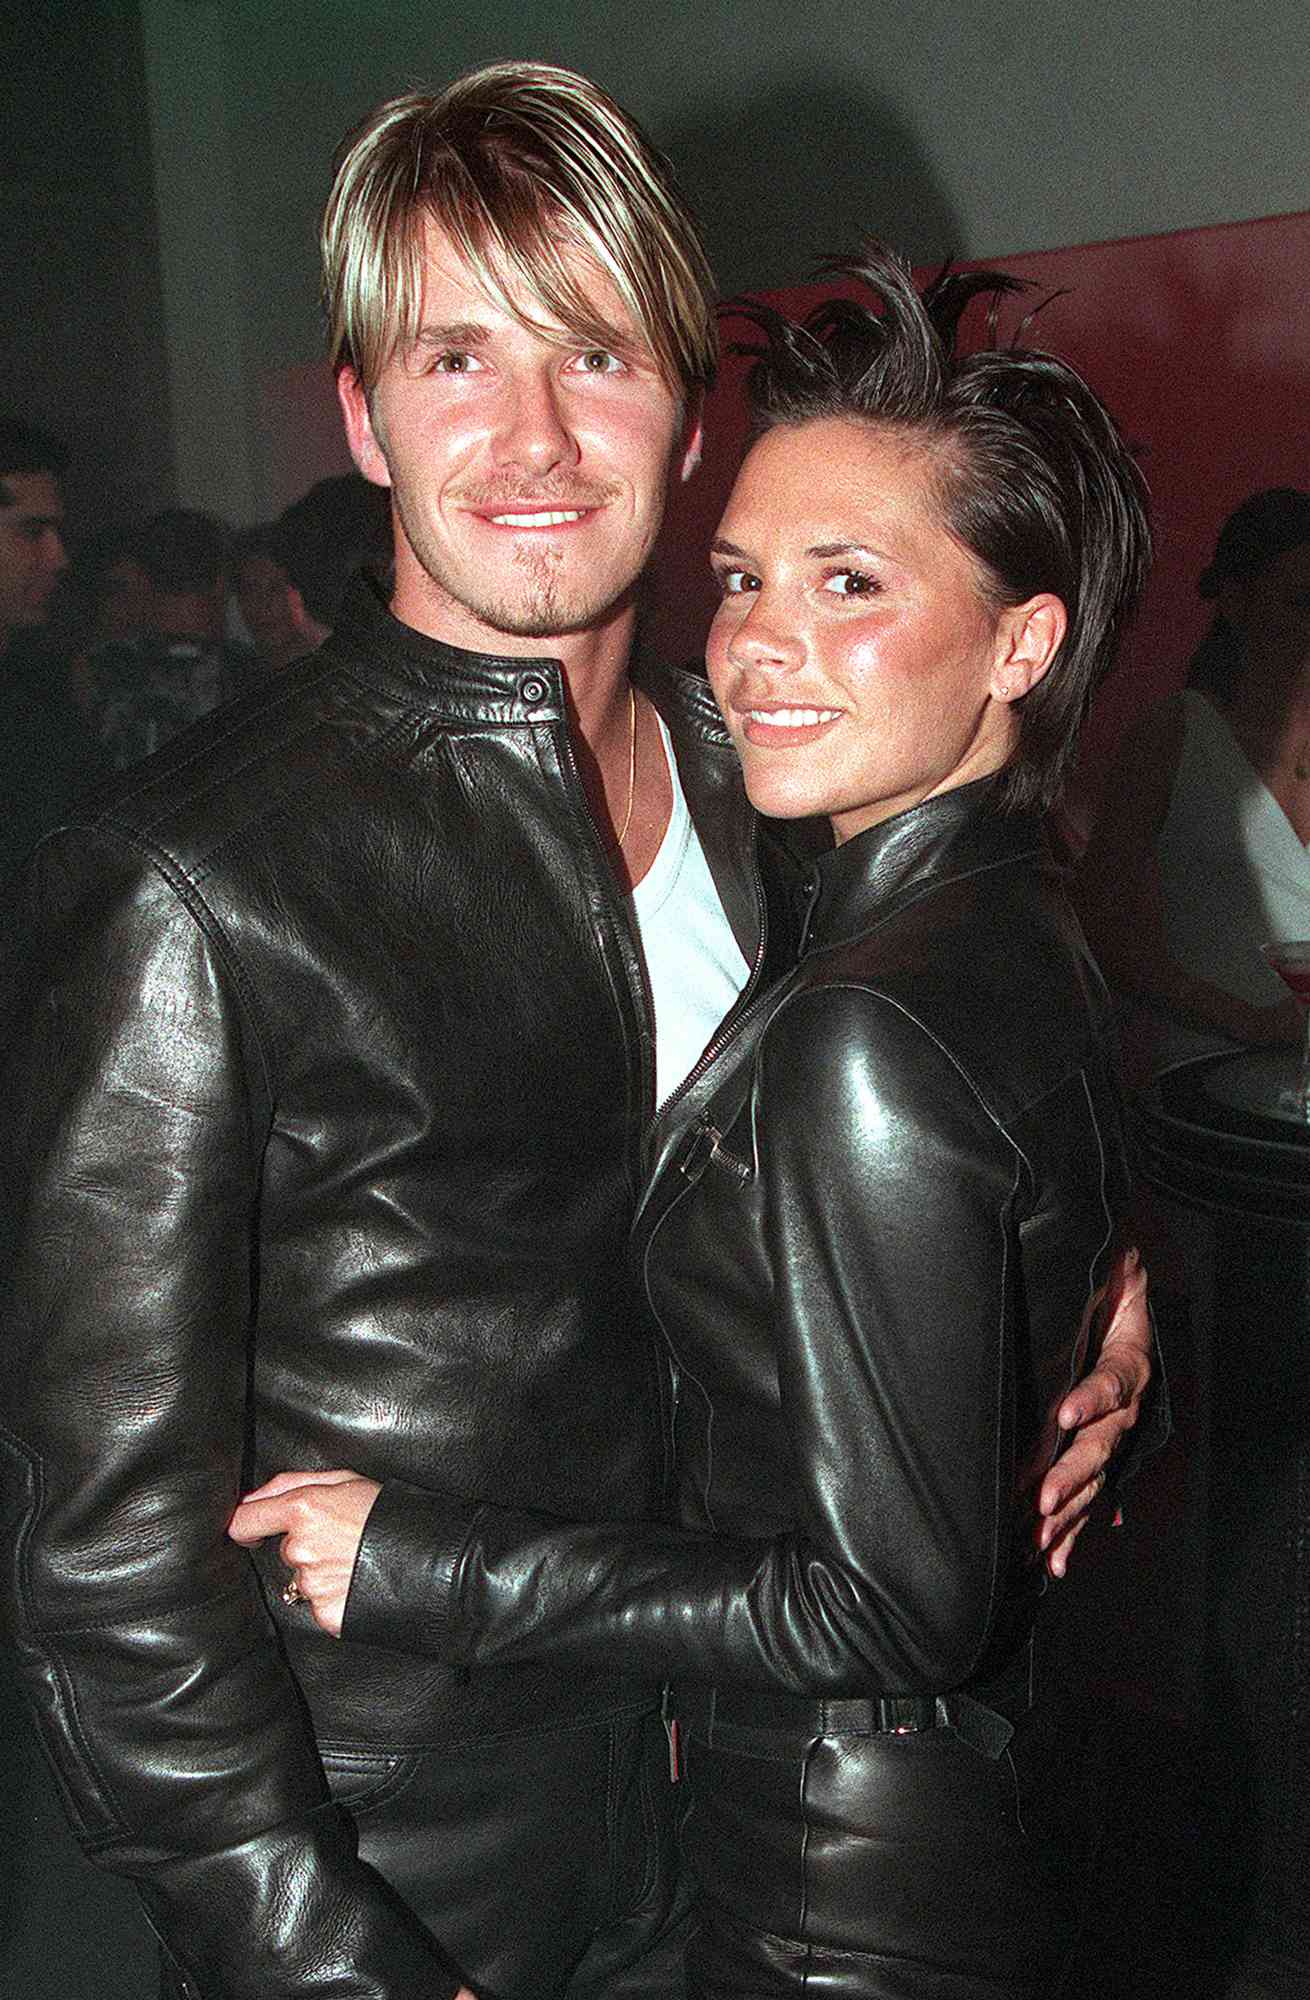 David Beckham and wife Victoria Beckham attend the Versace Store opening party on New Bond Street on June 11, 1999 in London